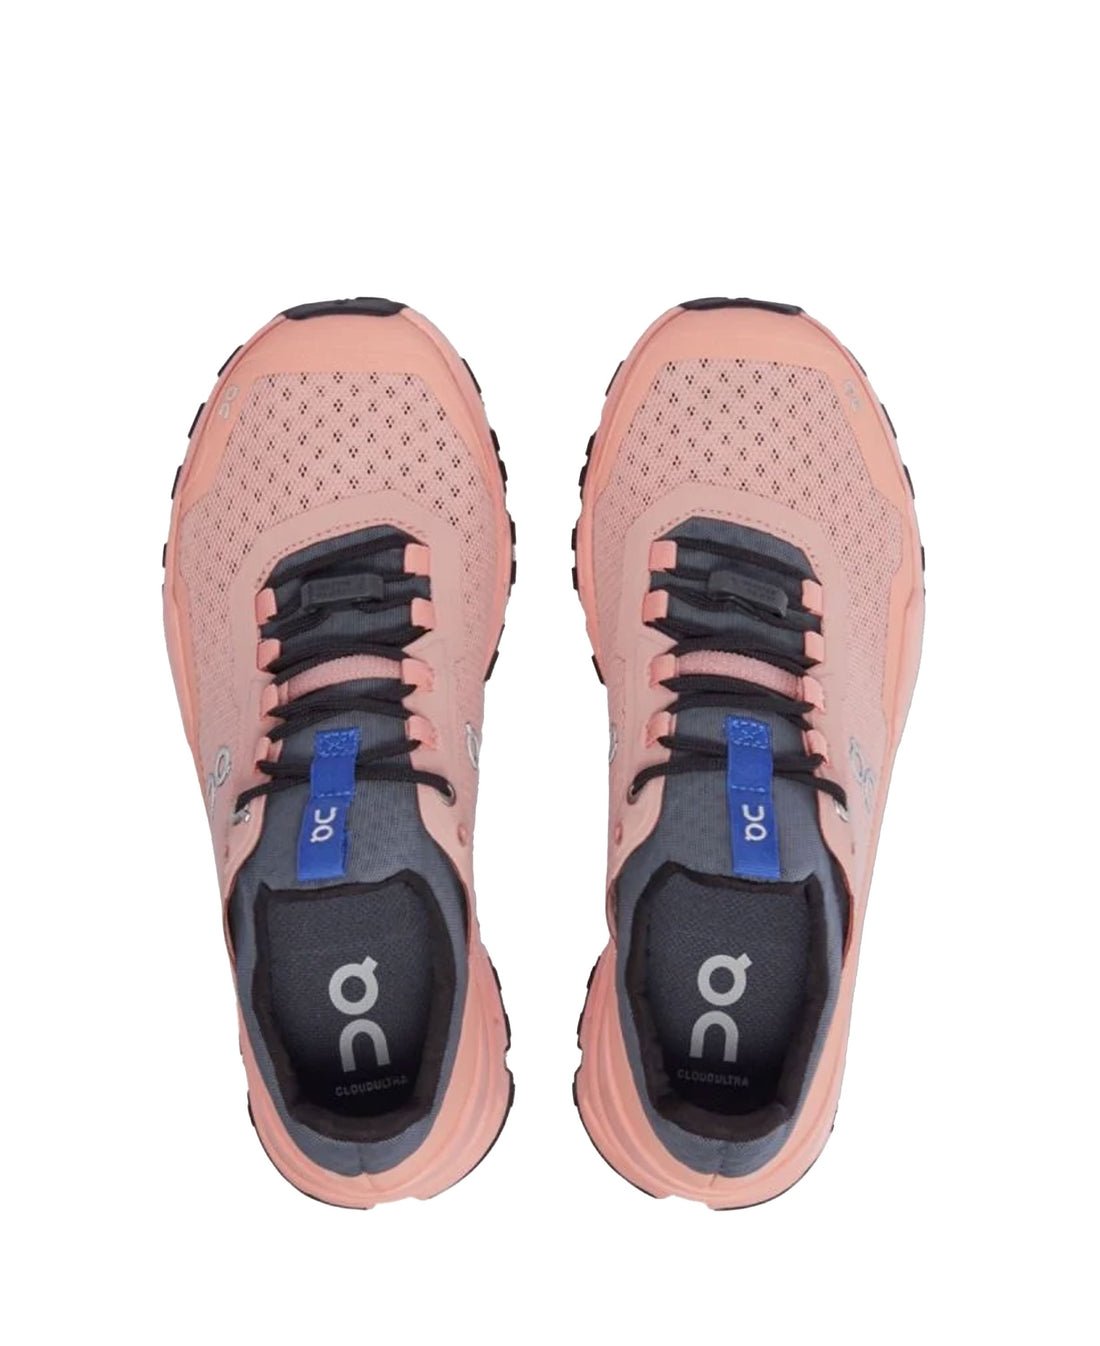 Cloudultra Running Trainers - Rose/Cobalt